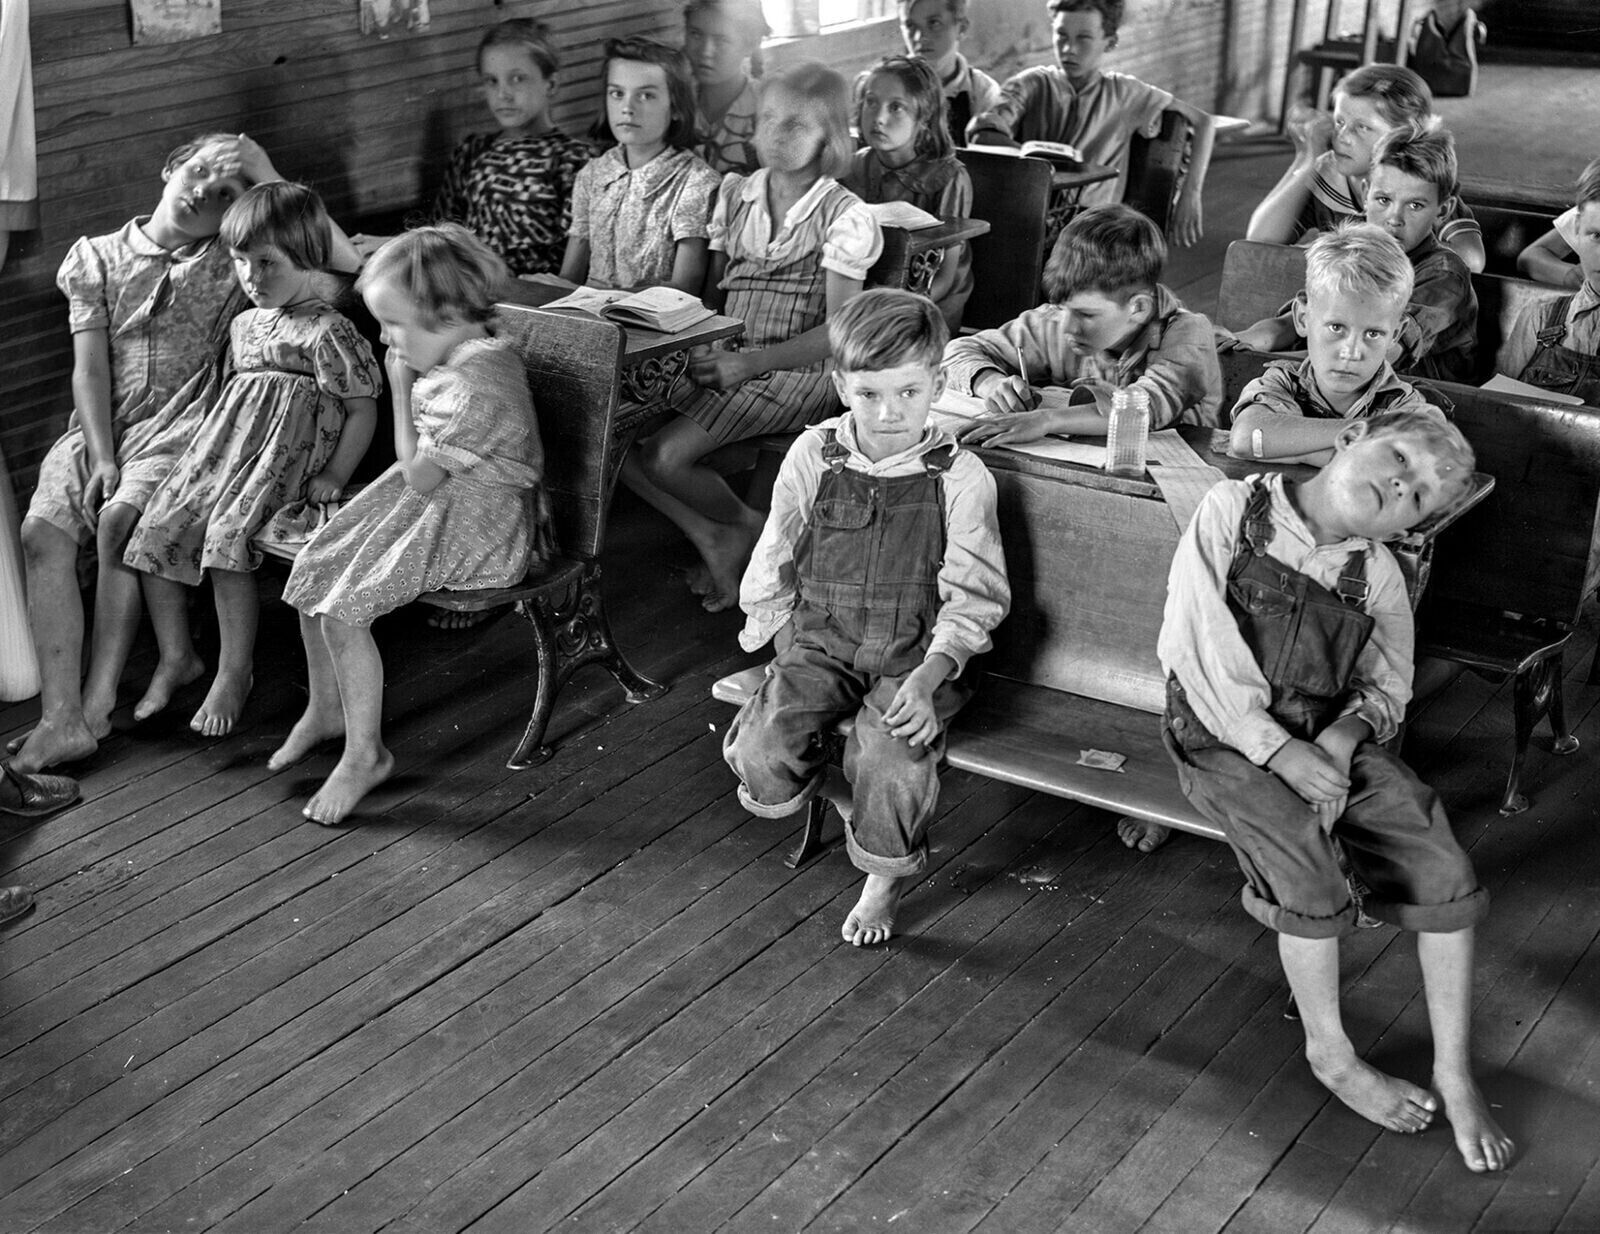 1940 DEPRESSION ERA SCHOOL ROOM with Barefoot Students Picture Photo 8x10